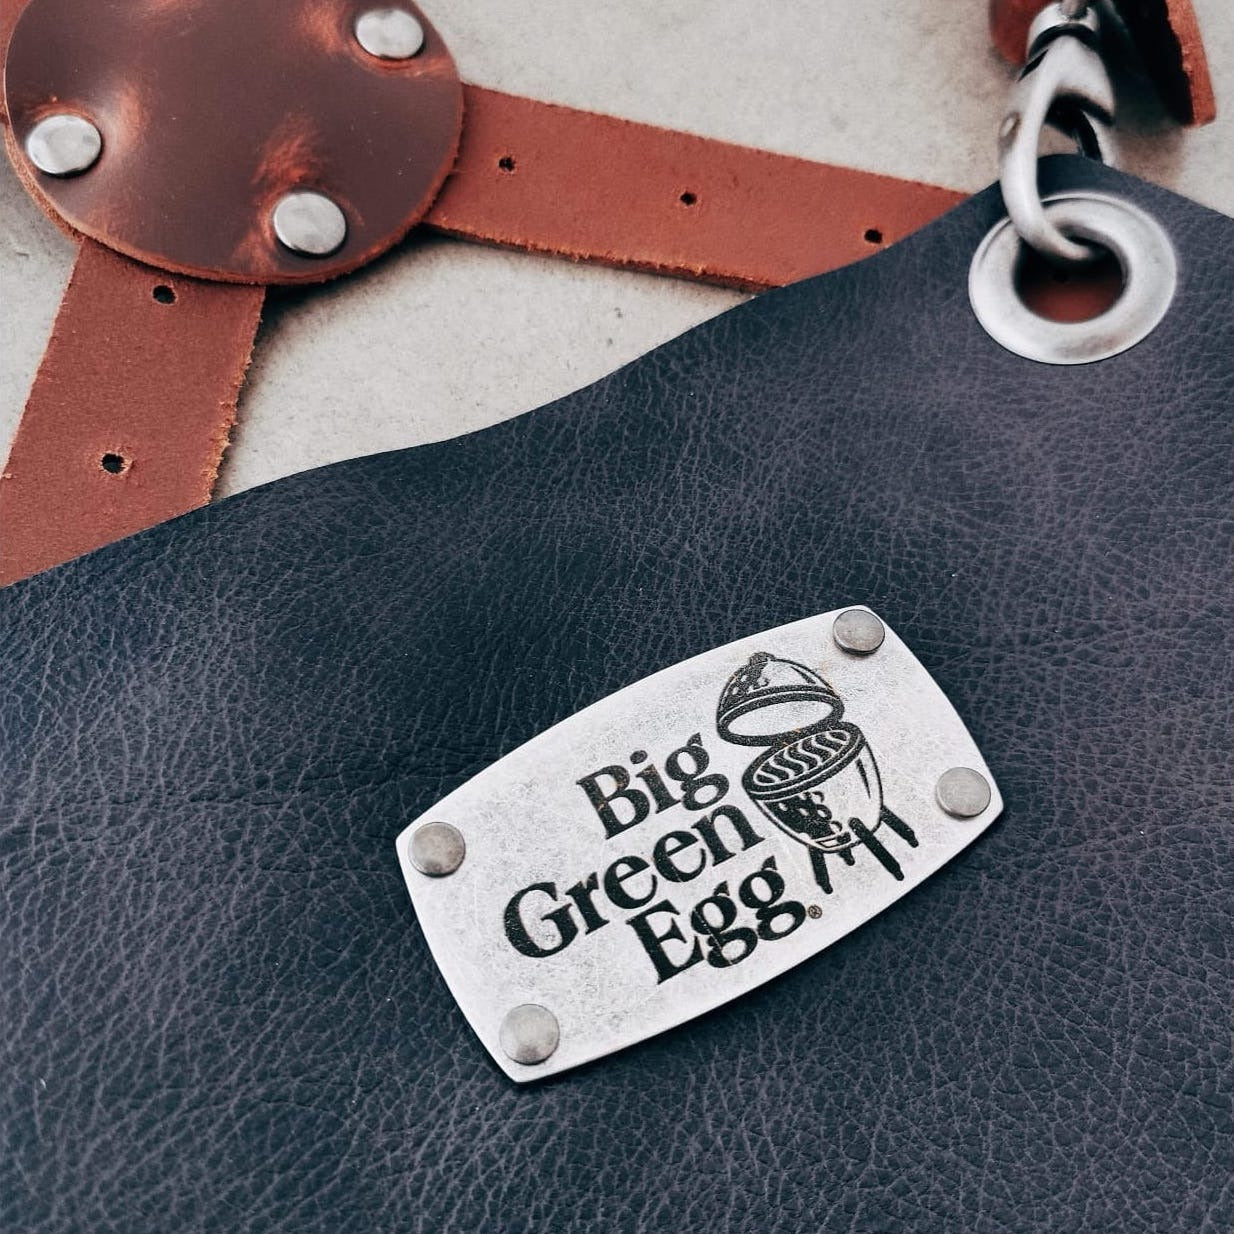 Leather Luggage Name Tag — Leather Aprons for woodworking, tattoo, salon,  barista, luthier, gunsmith